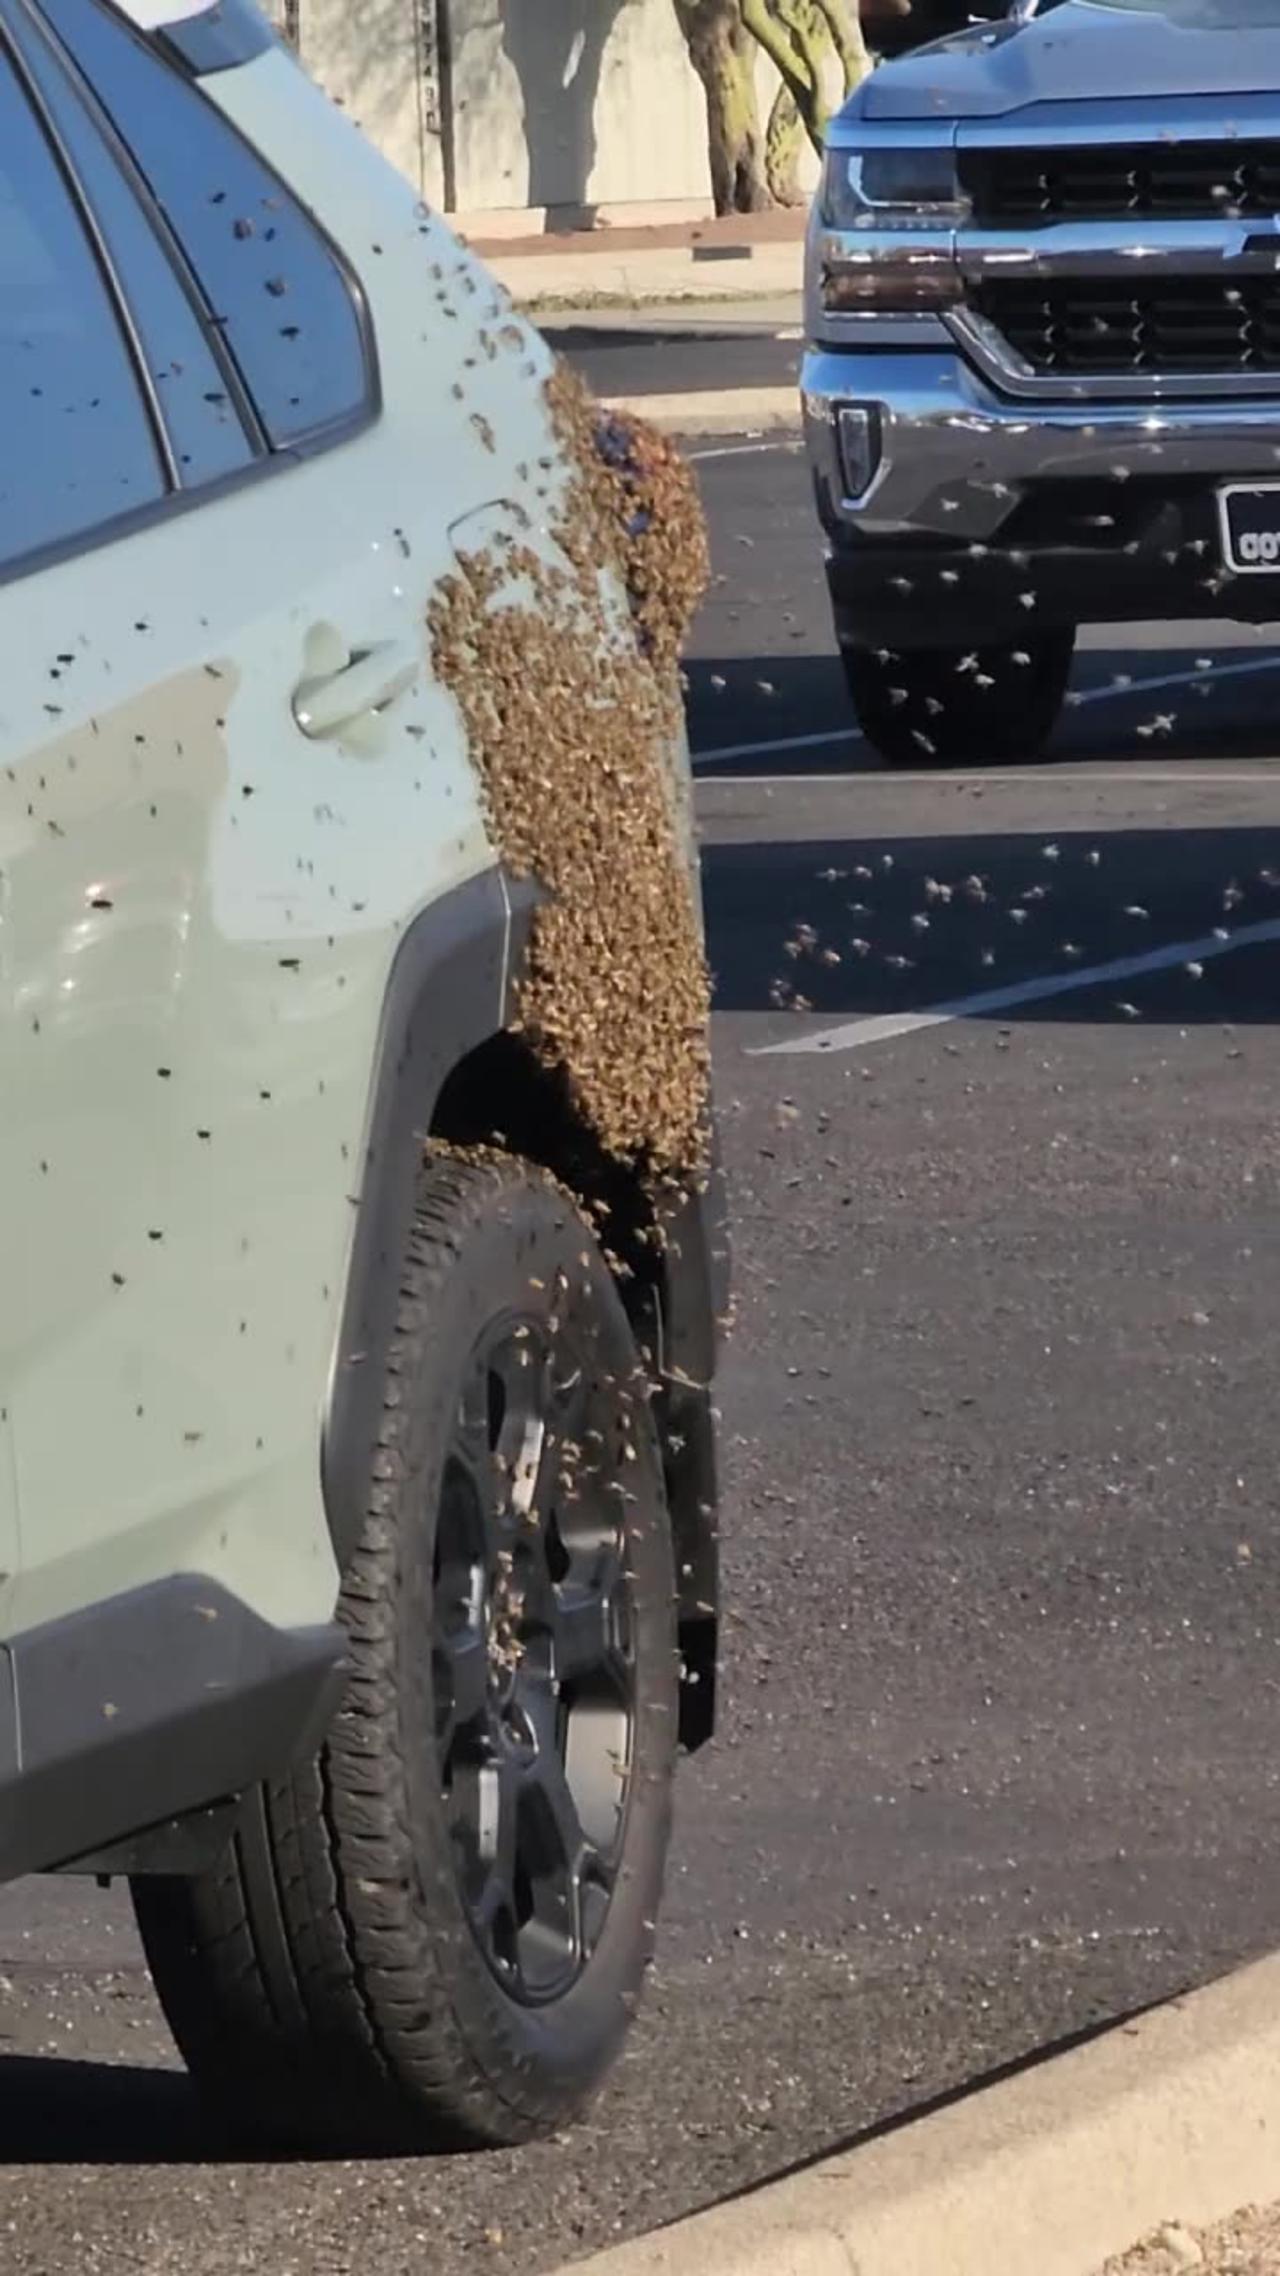 Bees Swarm SUV in Parking Lot